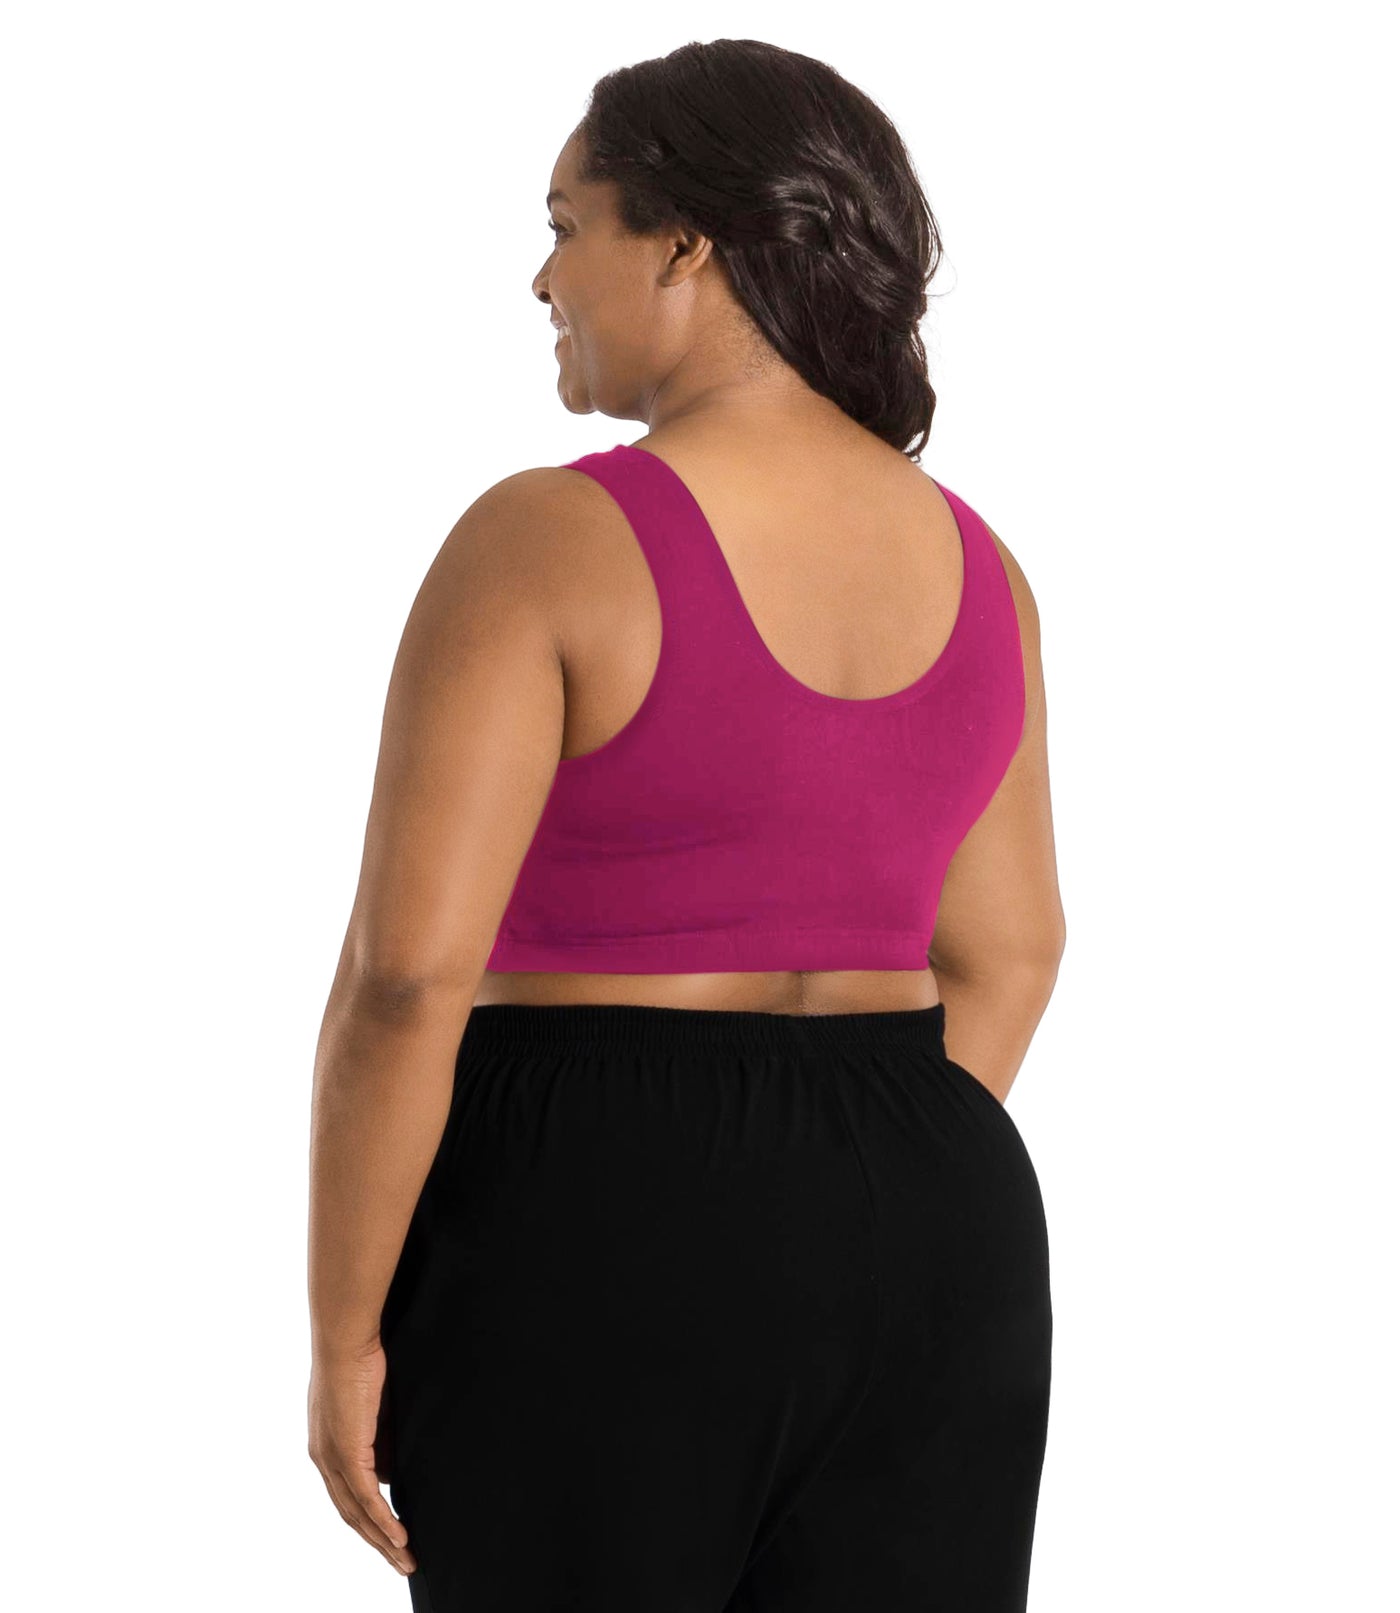 Plus size woman, facing back, wearing JunoActive plus size Stretch Naturals Scoop Neck Bra in Merlot. The woman is wearing black JunoActive plus size bottoms. Her arms fall naturally to her side.